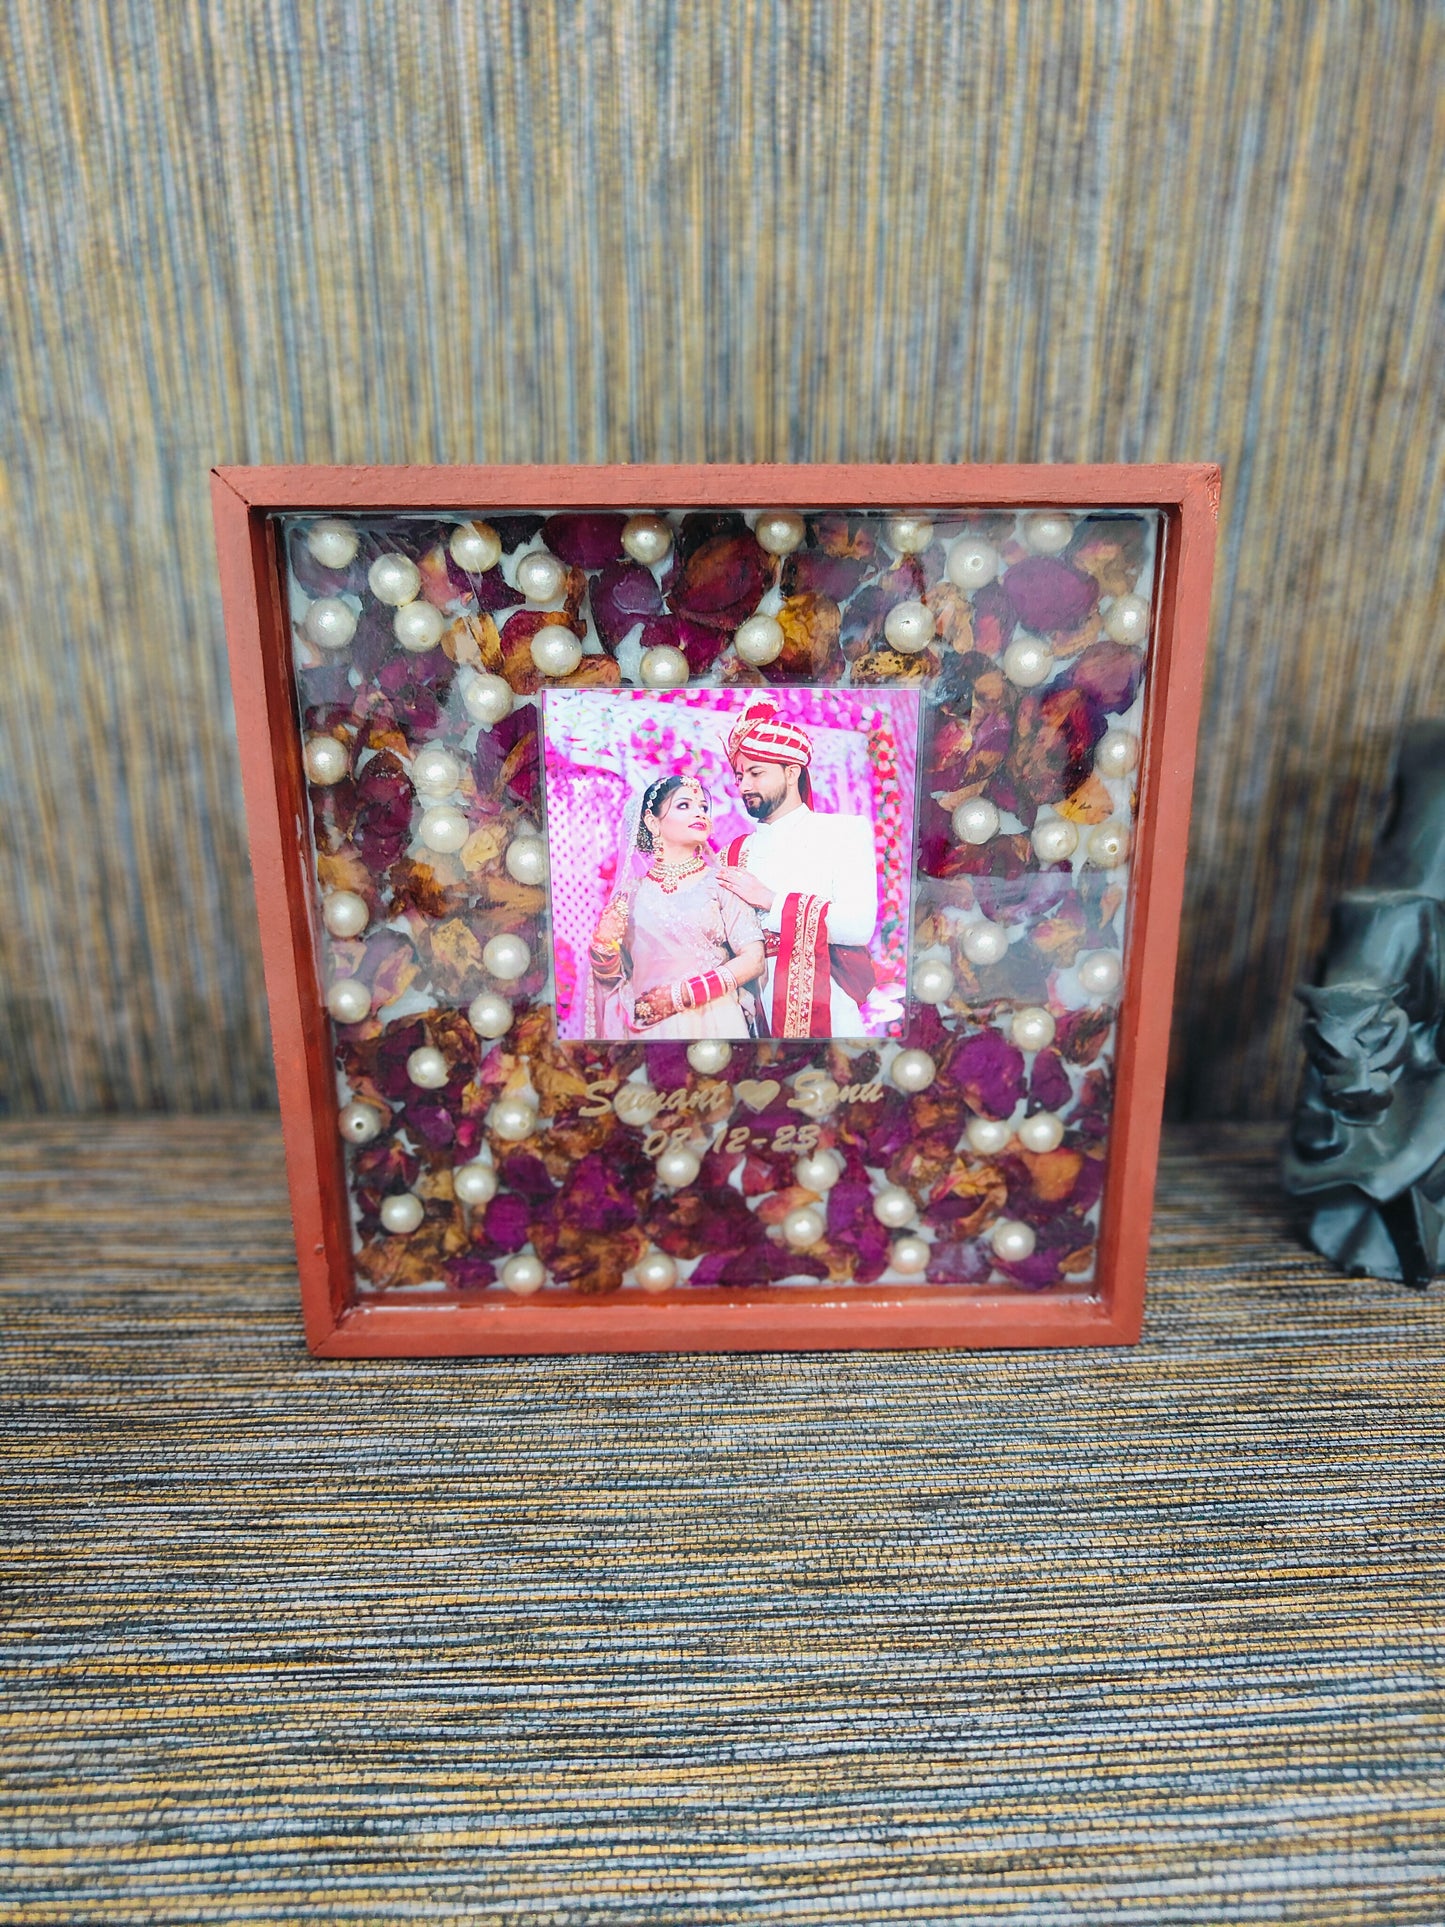 Resin Wedding Garland Preservation in Square Photo Frame | Big-size Pearls Decor with Personalized Wedding Details | Gift for Friends, Brother, Sister, Husband-Wife (10 Inch)